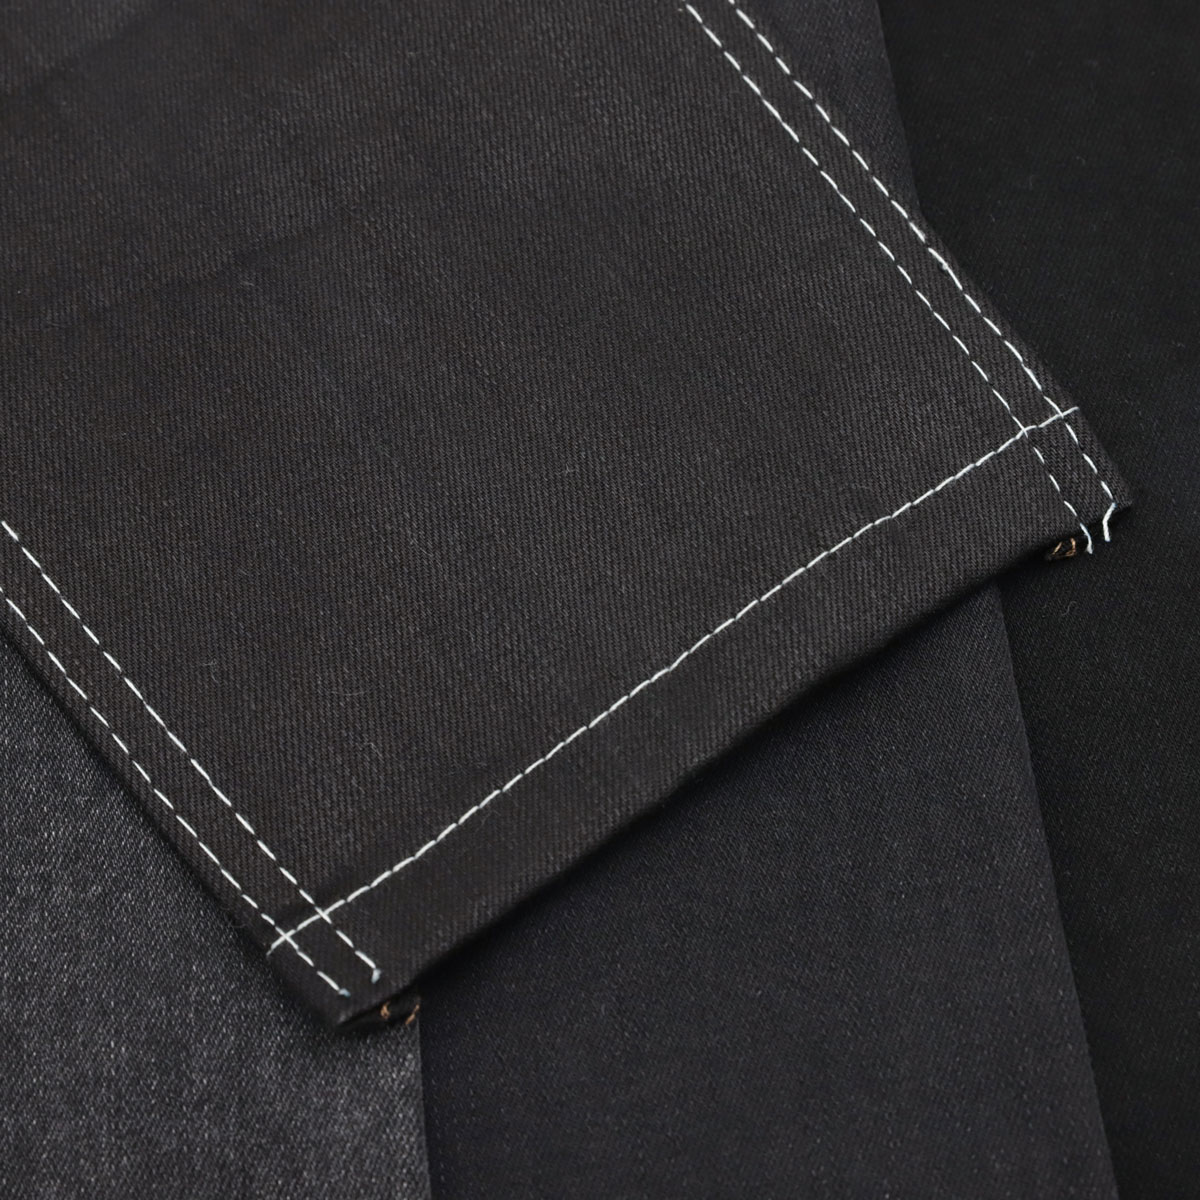 What Are the Advantages and Disadvantages of Twill Denim Fabric? 1